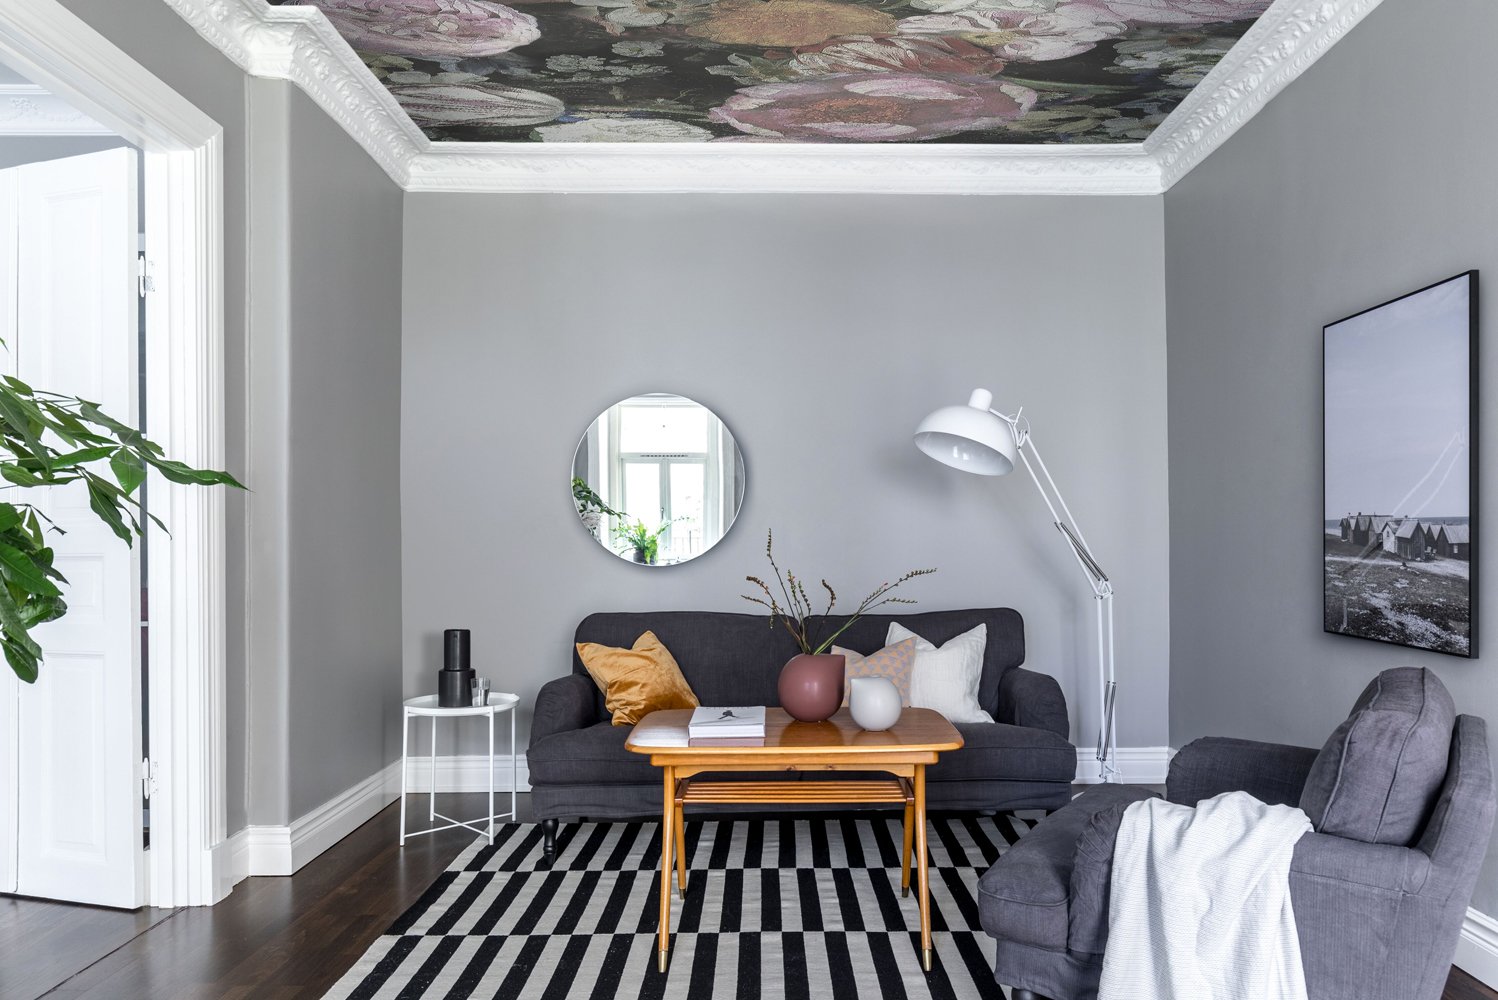 Rebel Walls launched ceiling wallpapers